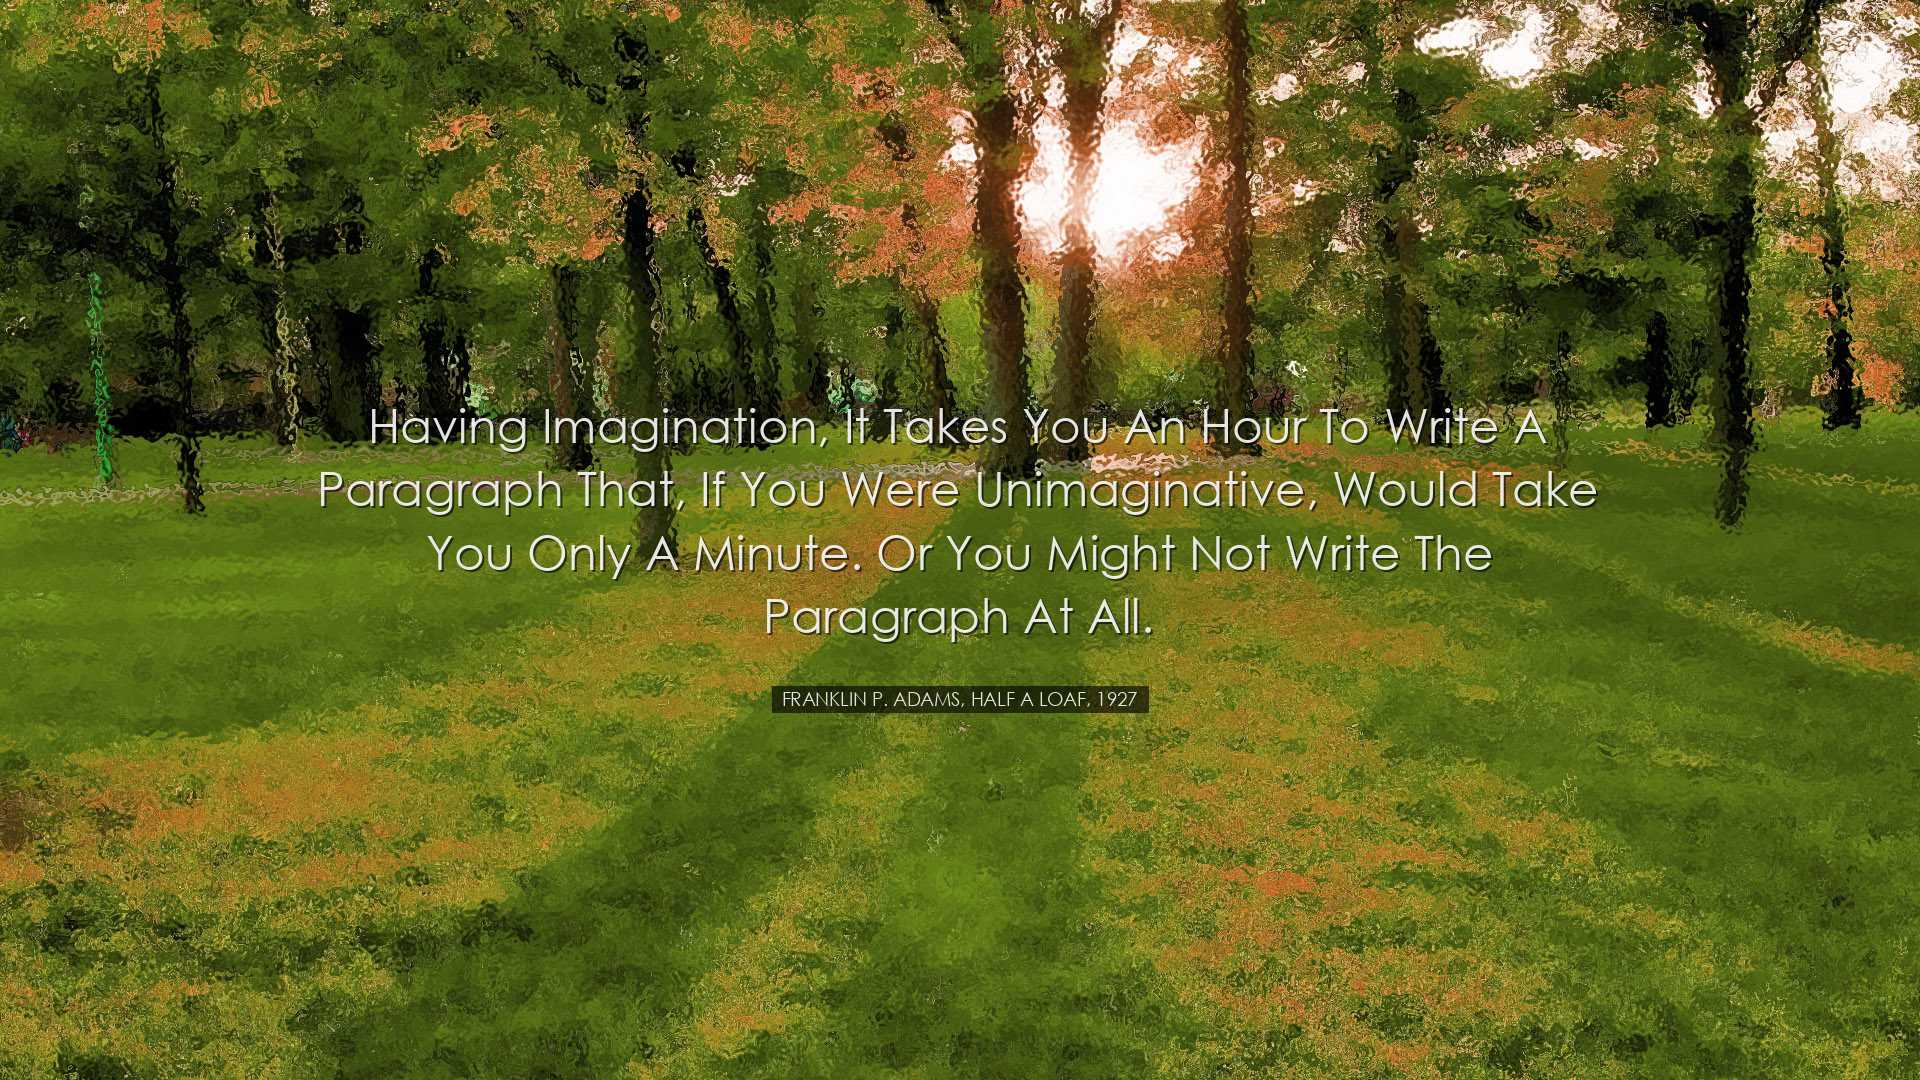 Having imagination, it takes you an hour to write a paragraph that